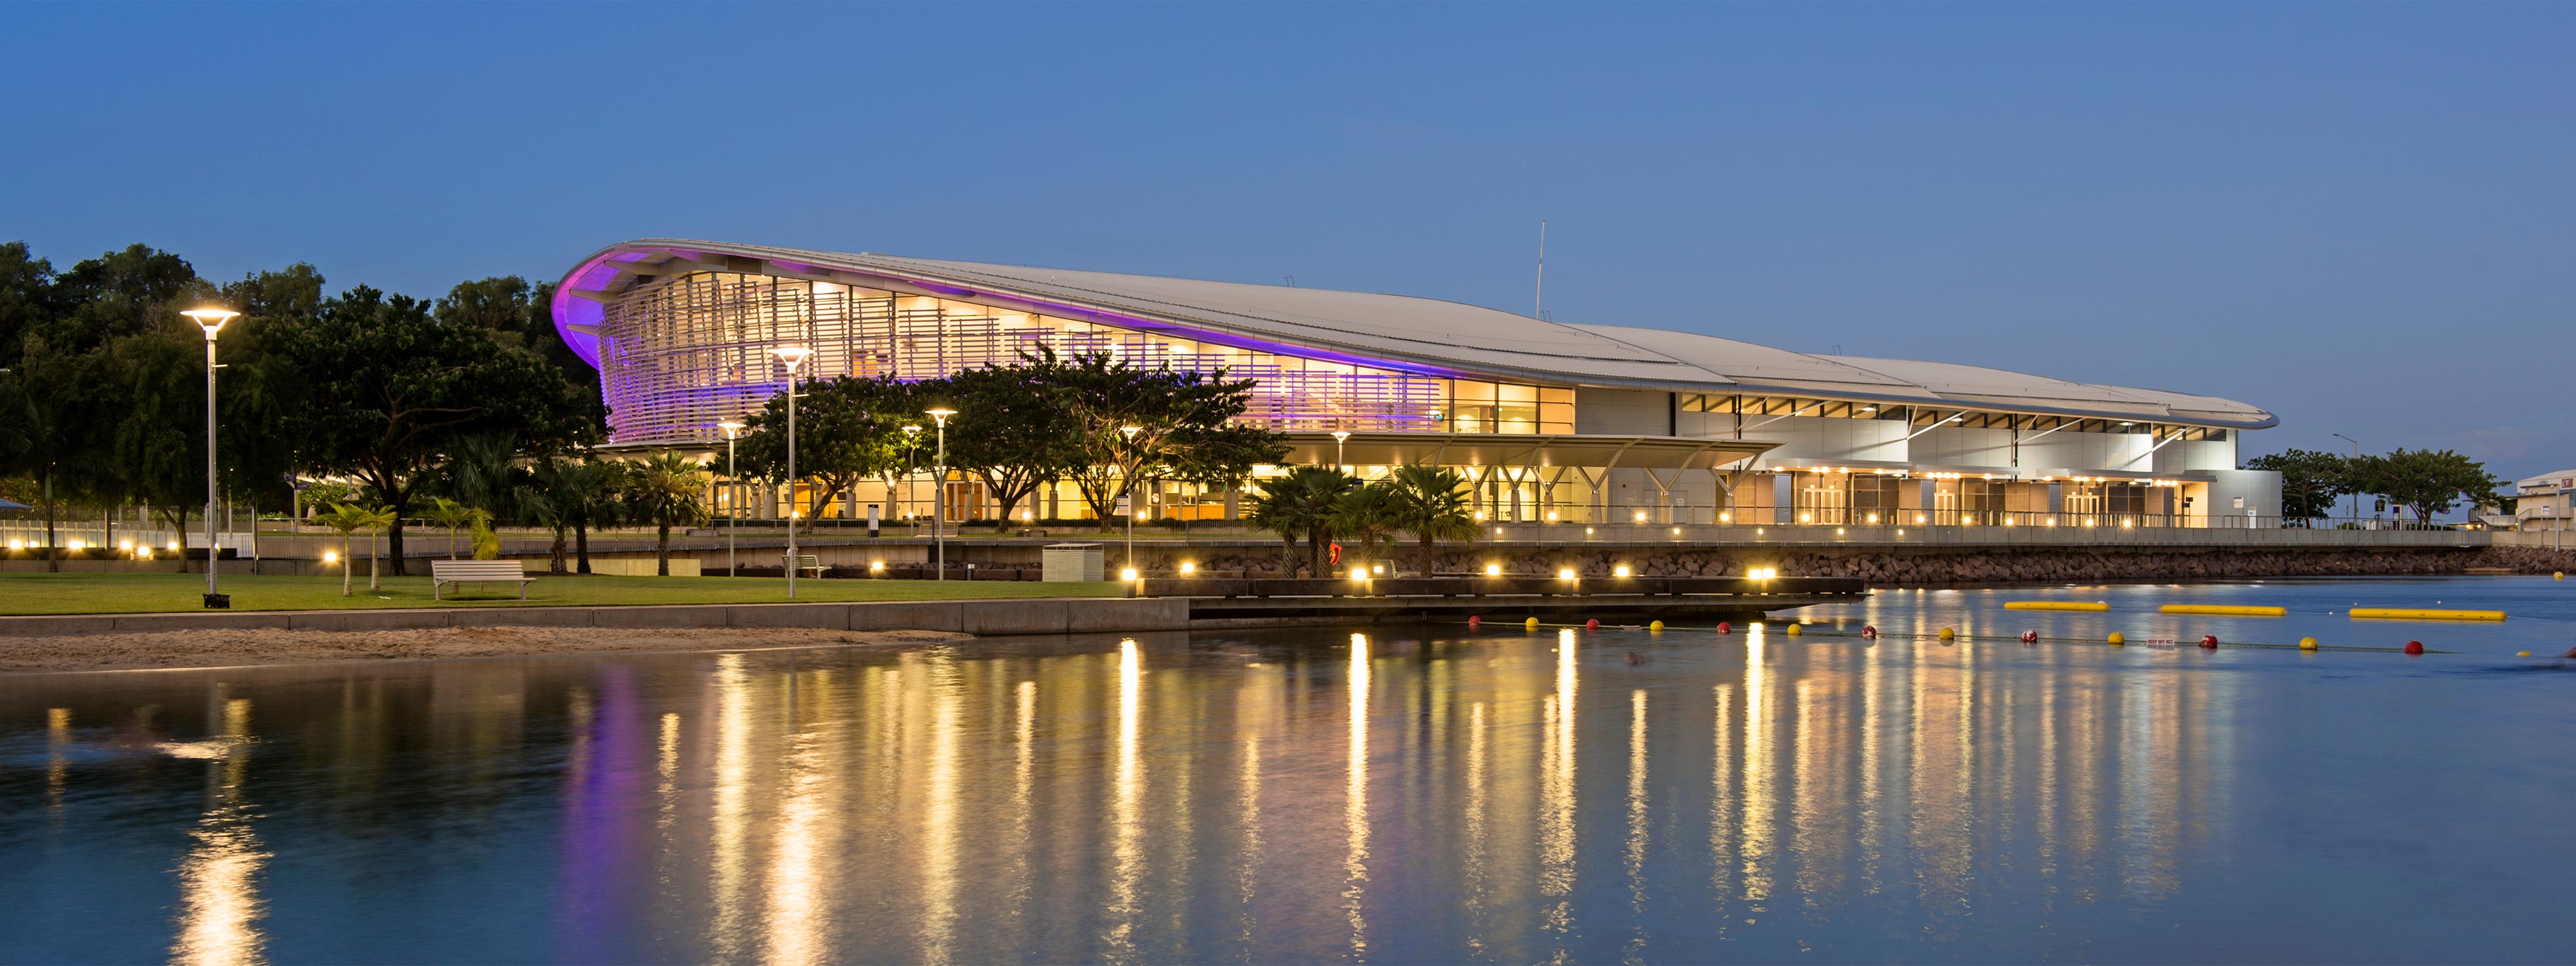 Darwin Convention Centre shares some ‘Top End’ magic!